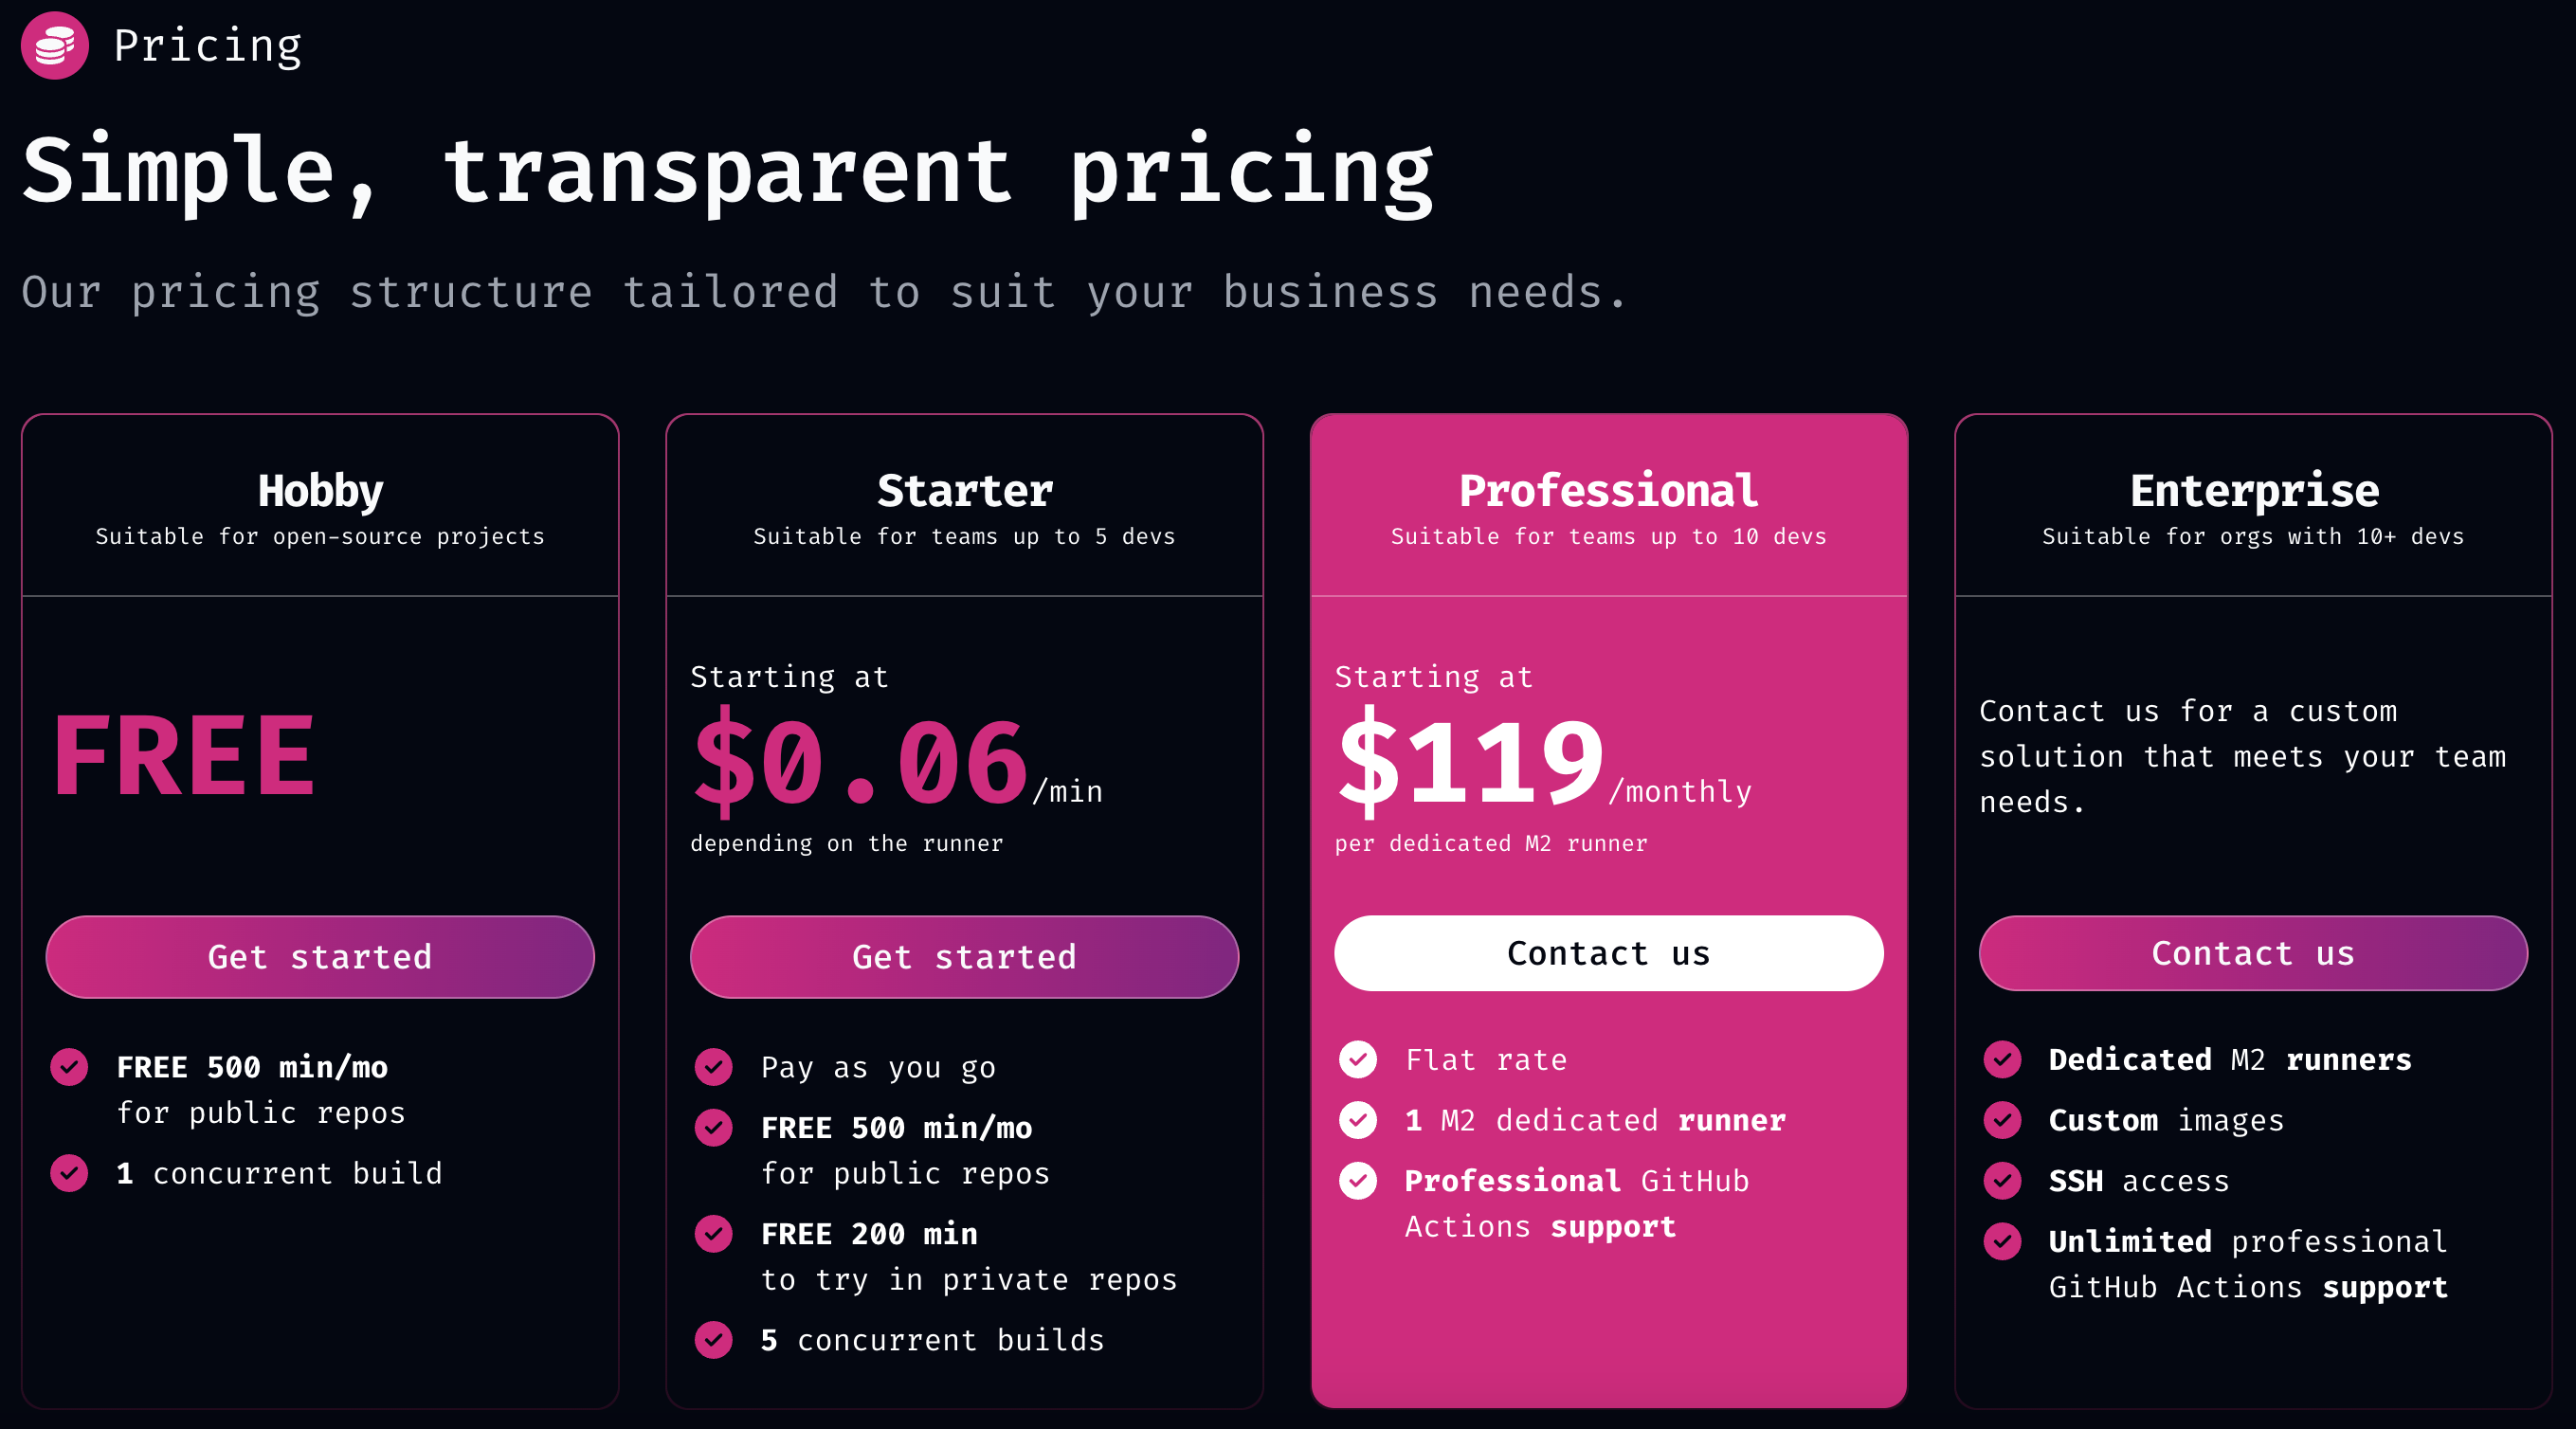 An image showcasing the pricing tiers for FlyCI: Hobby, Starter, Professional, and Enterprise.